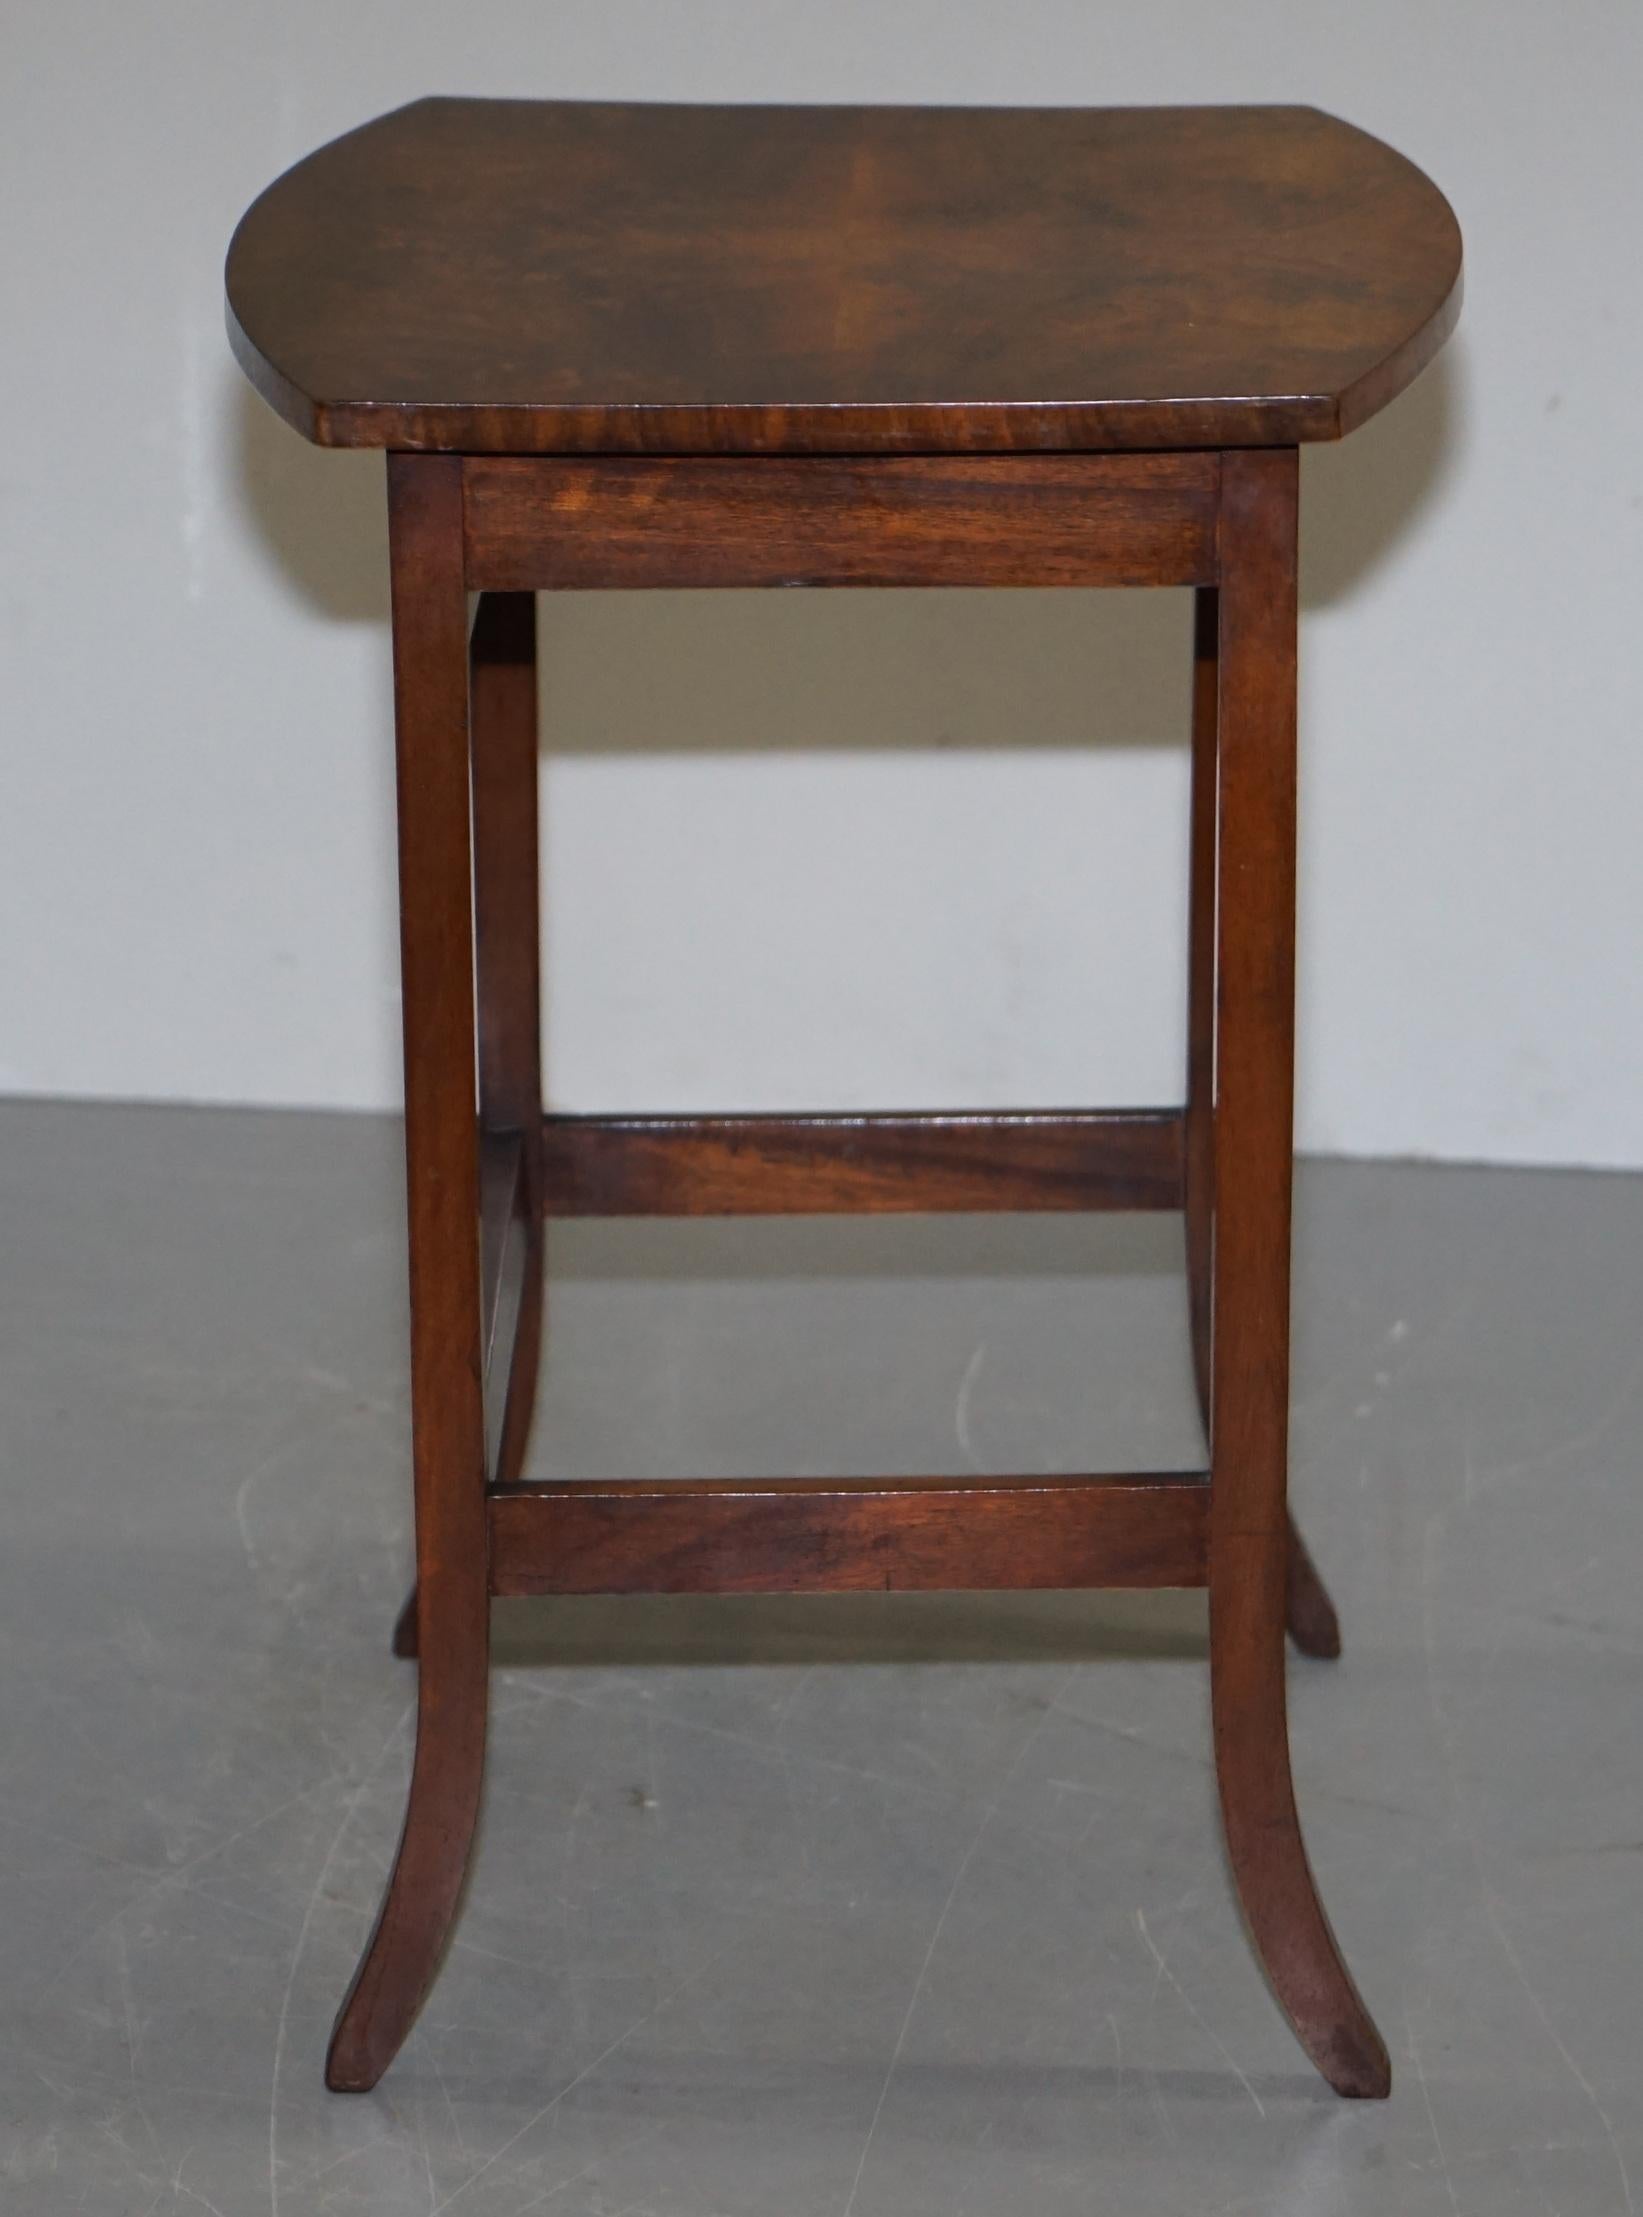 Lovely circa 1900 Late Victorian Burr Walnut Nest of Tables with Oval Main Piece For Sale 9